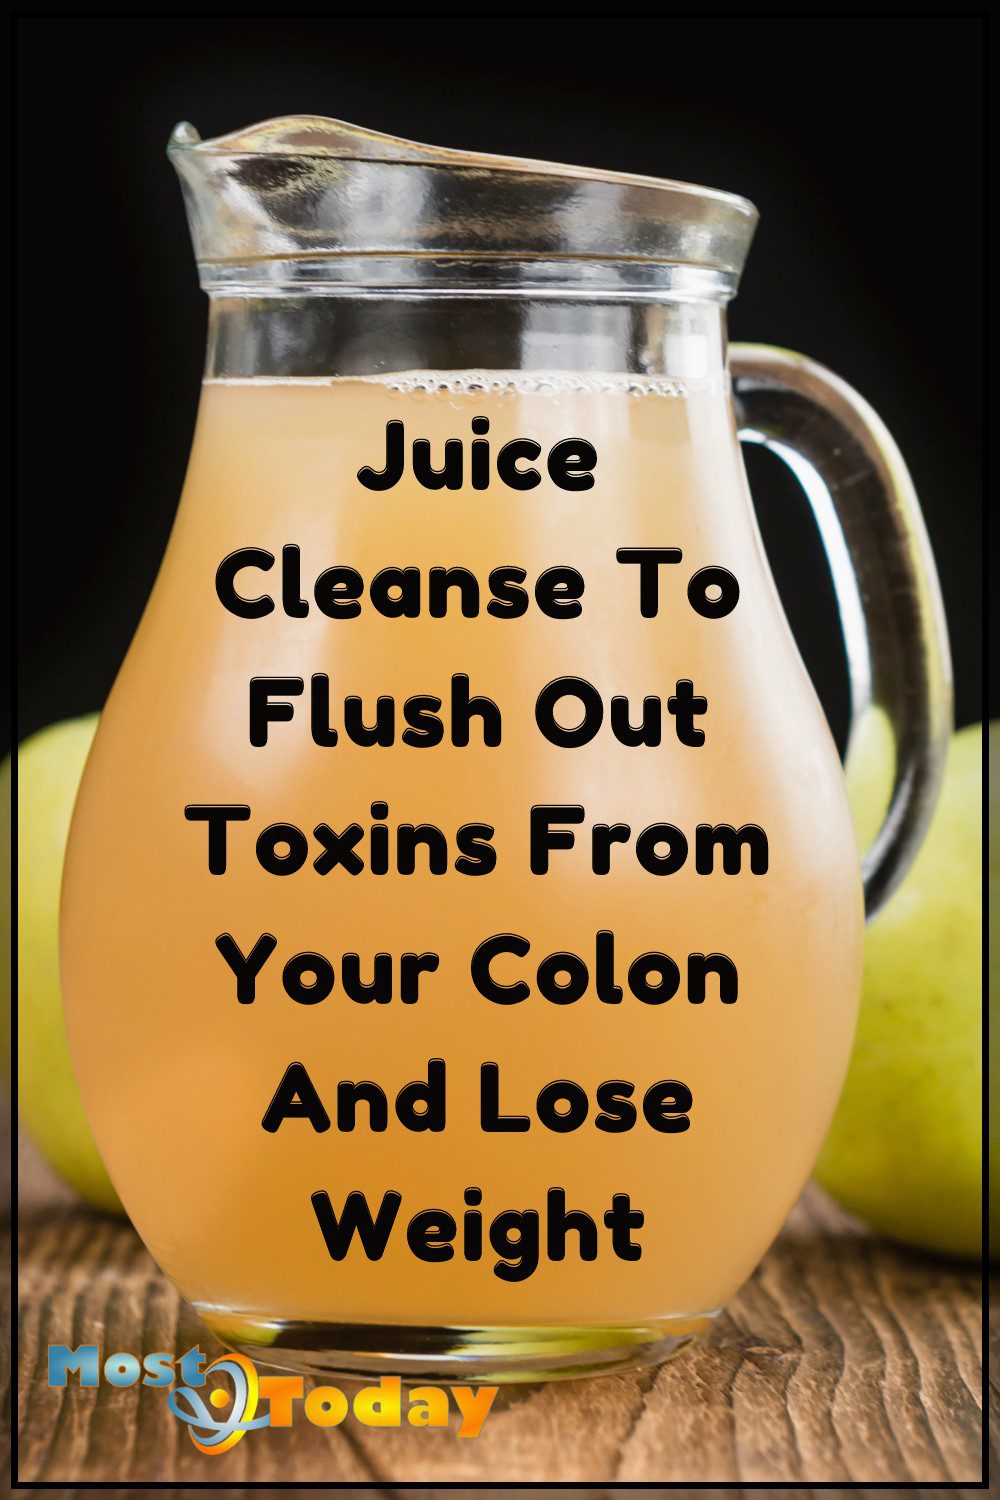 Best Juice Cleanse To Flush Out Toxins From Your Colon And Weight Loss